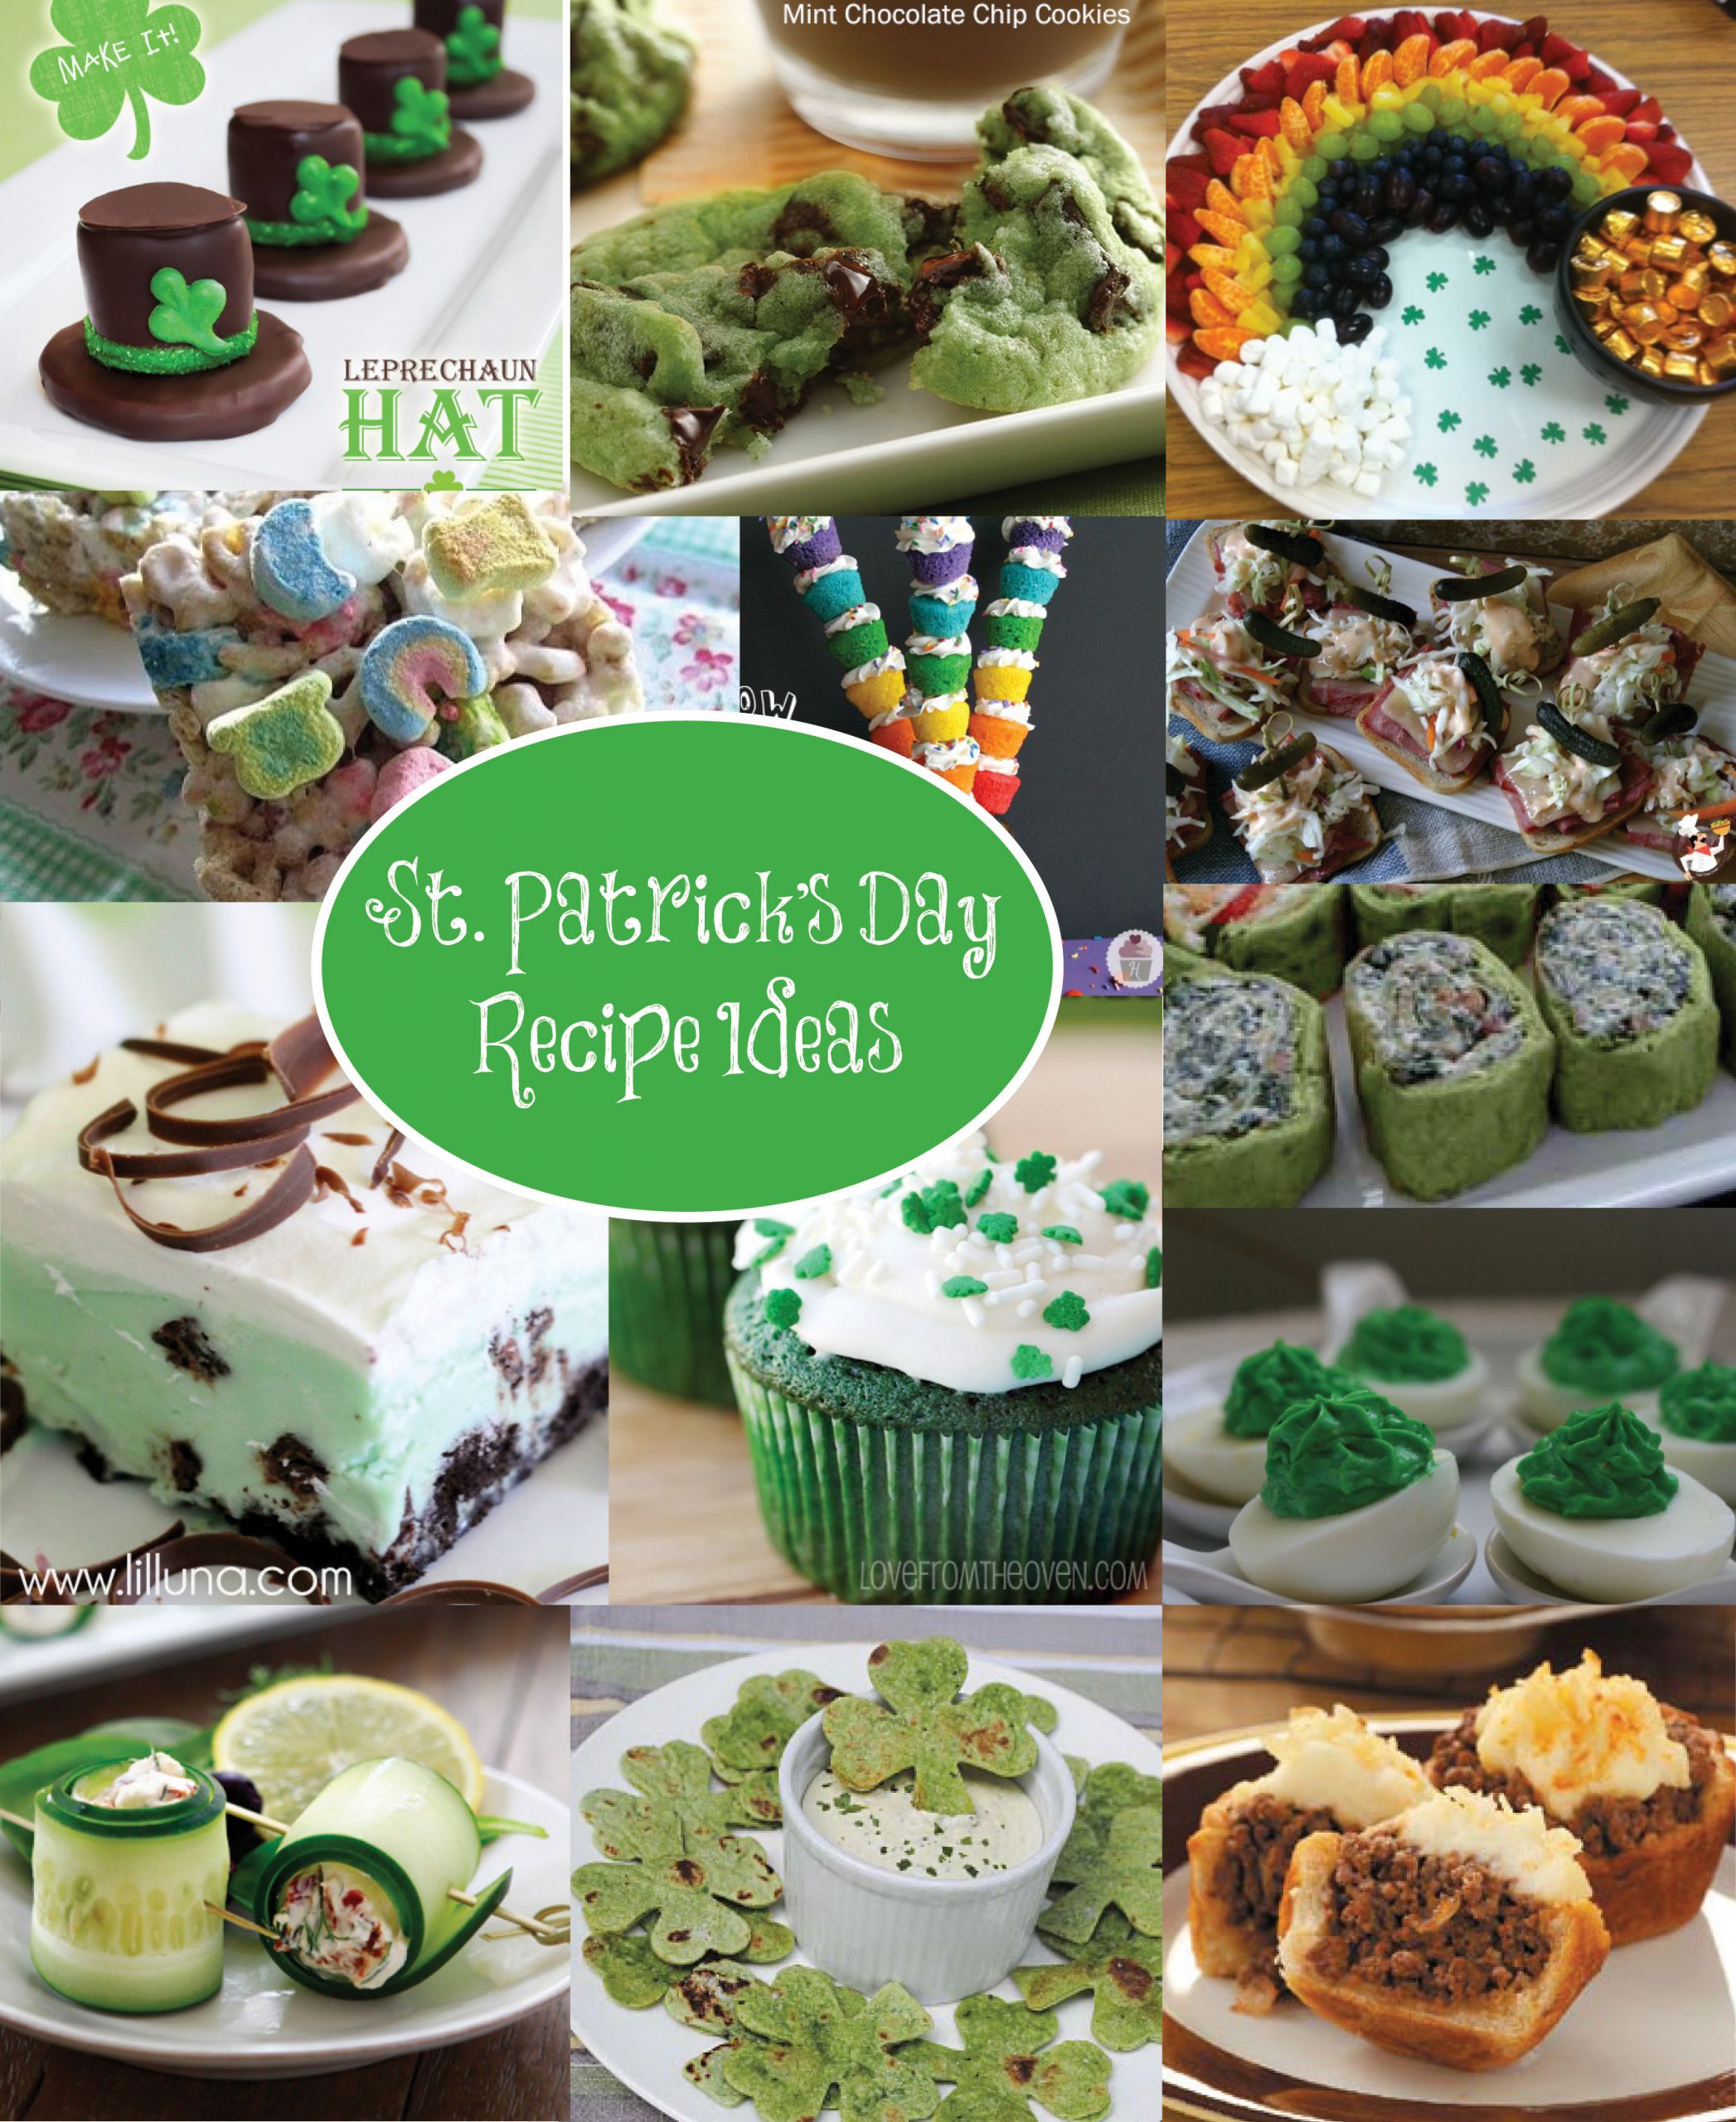 St Patrick Day Party Food Ideas
 6 ideas to bring Irish fun into the workplace for St